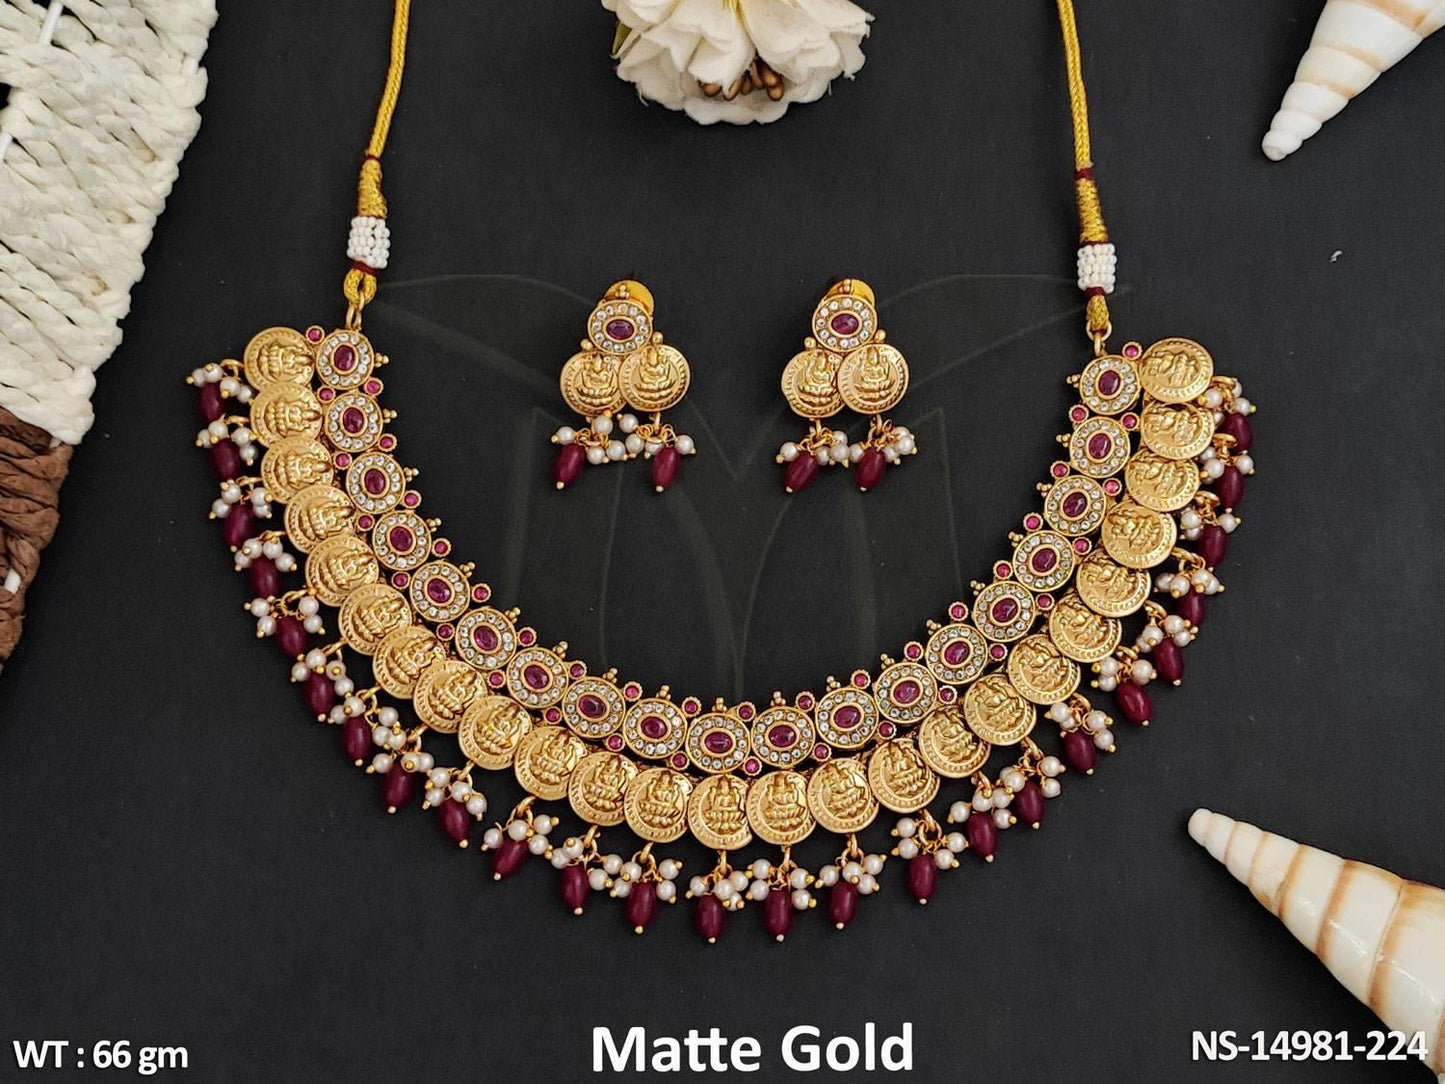 This stunning Temple Jewellery necklace set features a beautiful design with impeccable matte gold polish